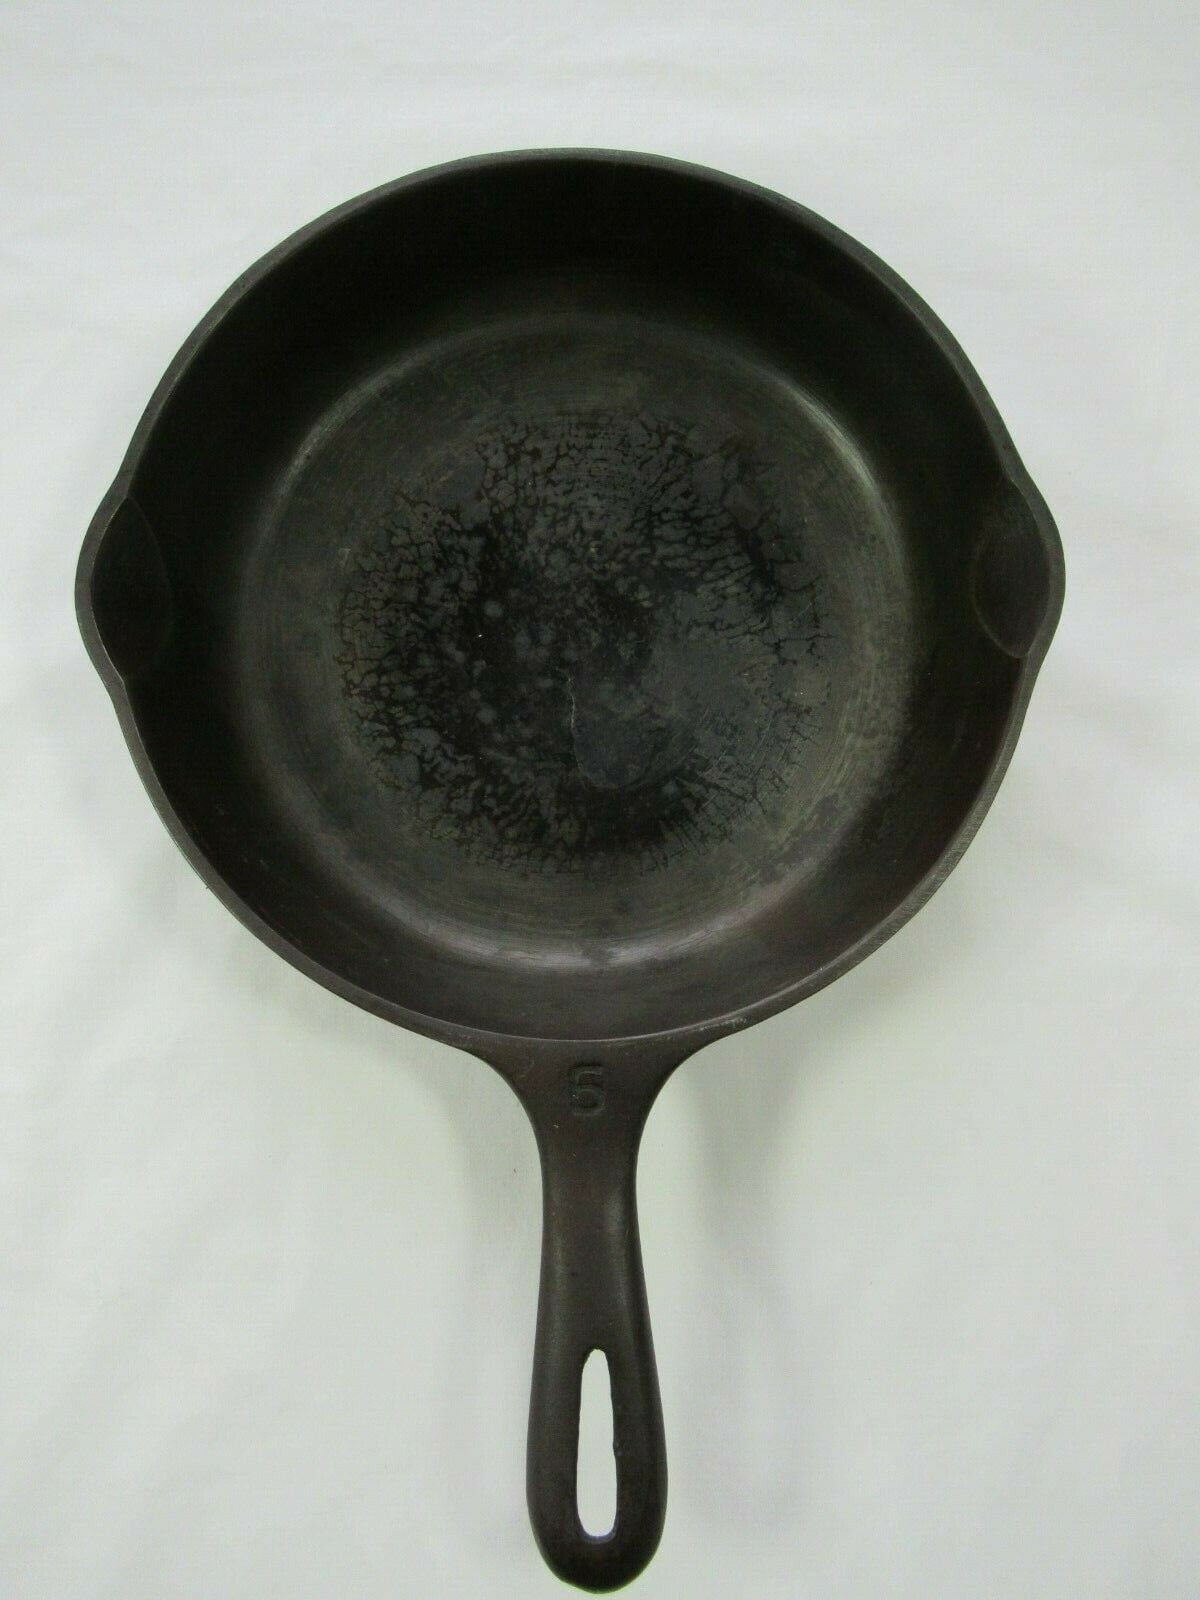 8 Black and Grey Ceramic Granite Skillet with Wooden Decal Handle